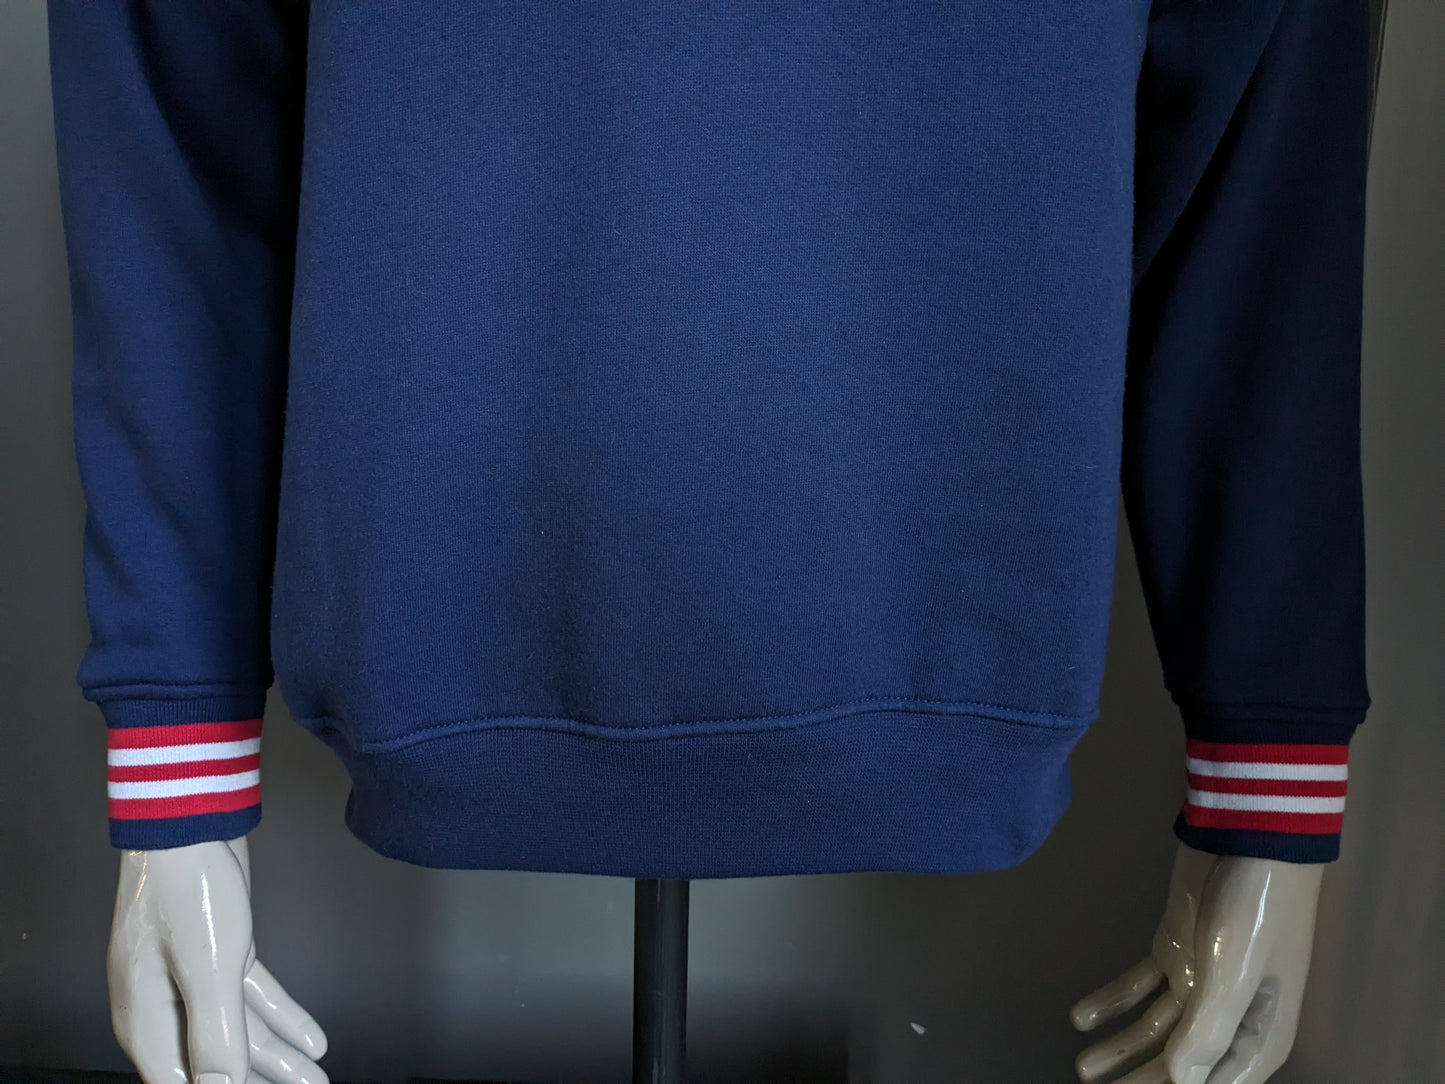 Vintage umbro sweater. Dark blue with applications on the sleeves. Size L.